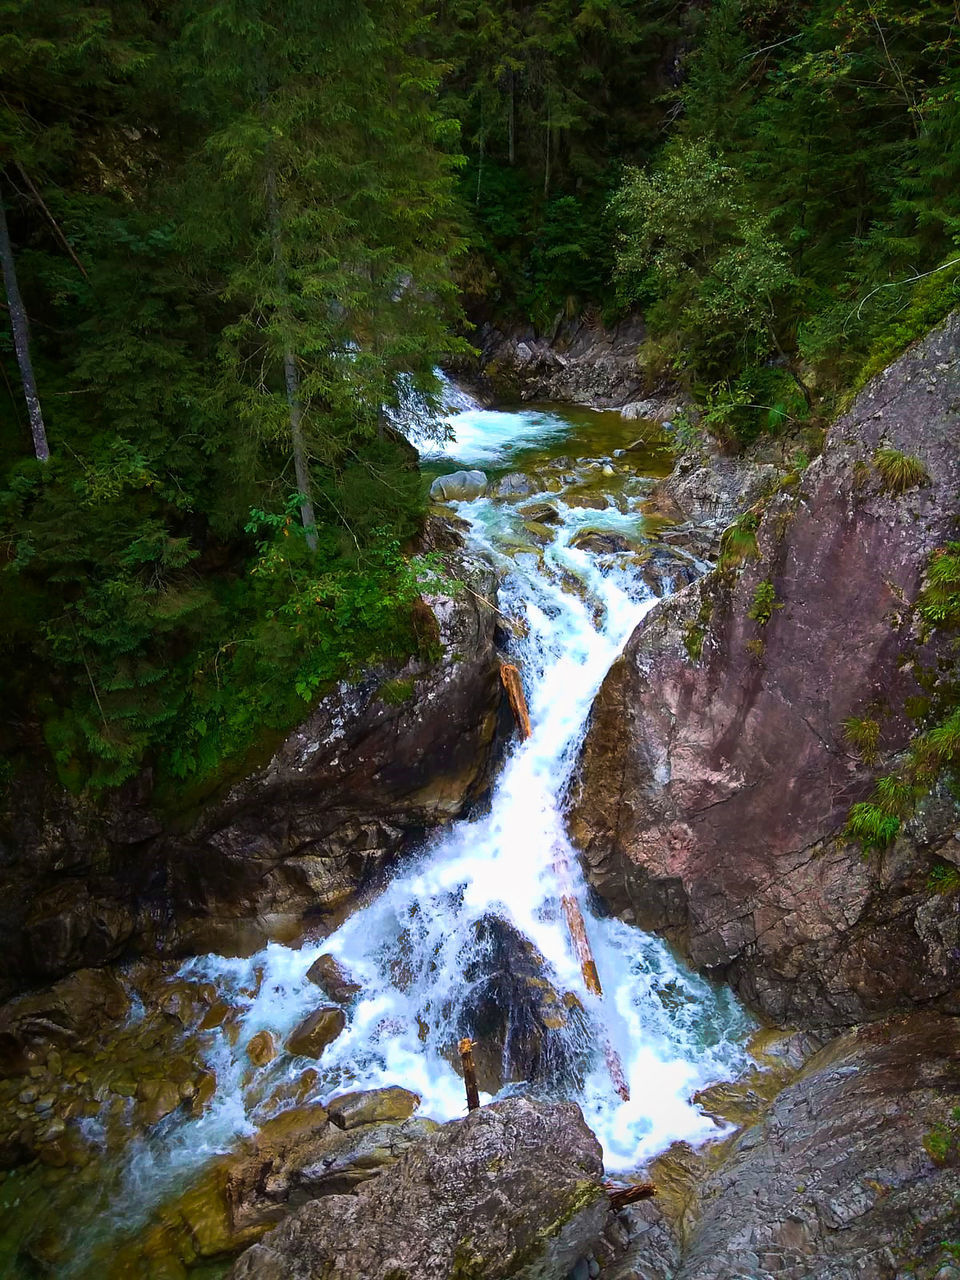 SCENIC VIEW OF STREAM FLOWING THROUGH ROCKS IN FOREST